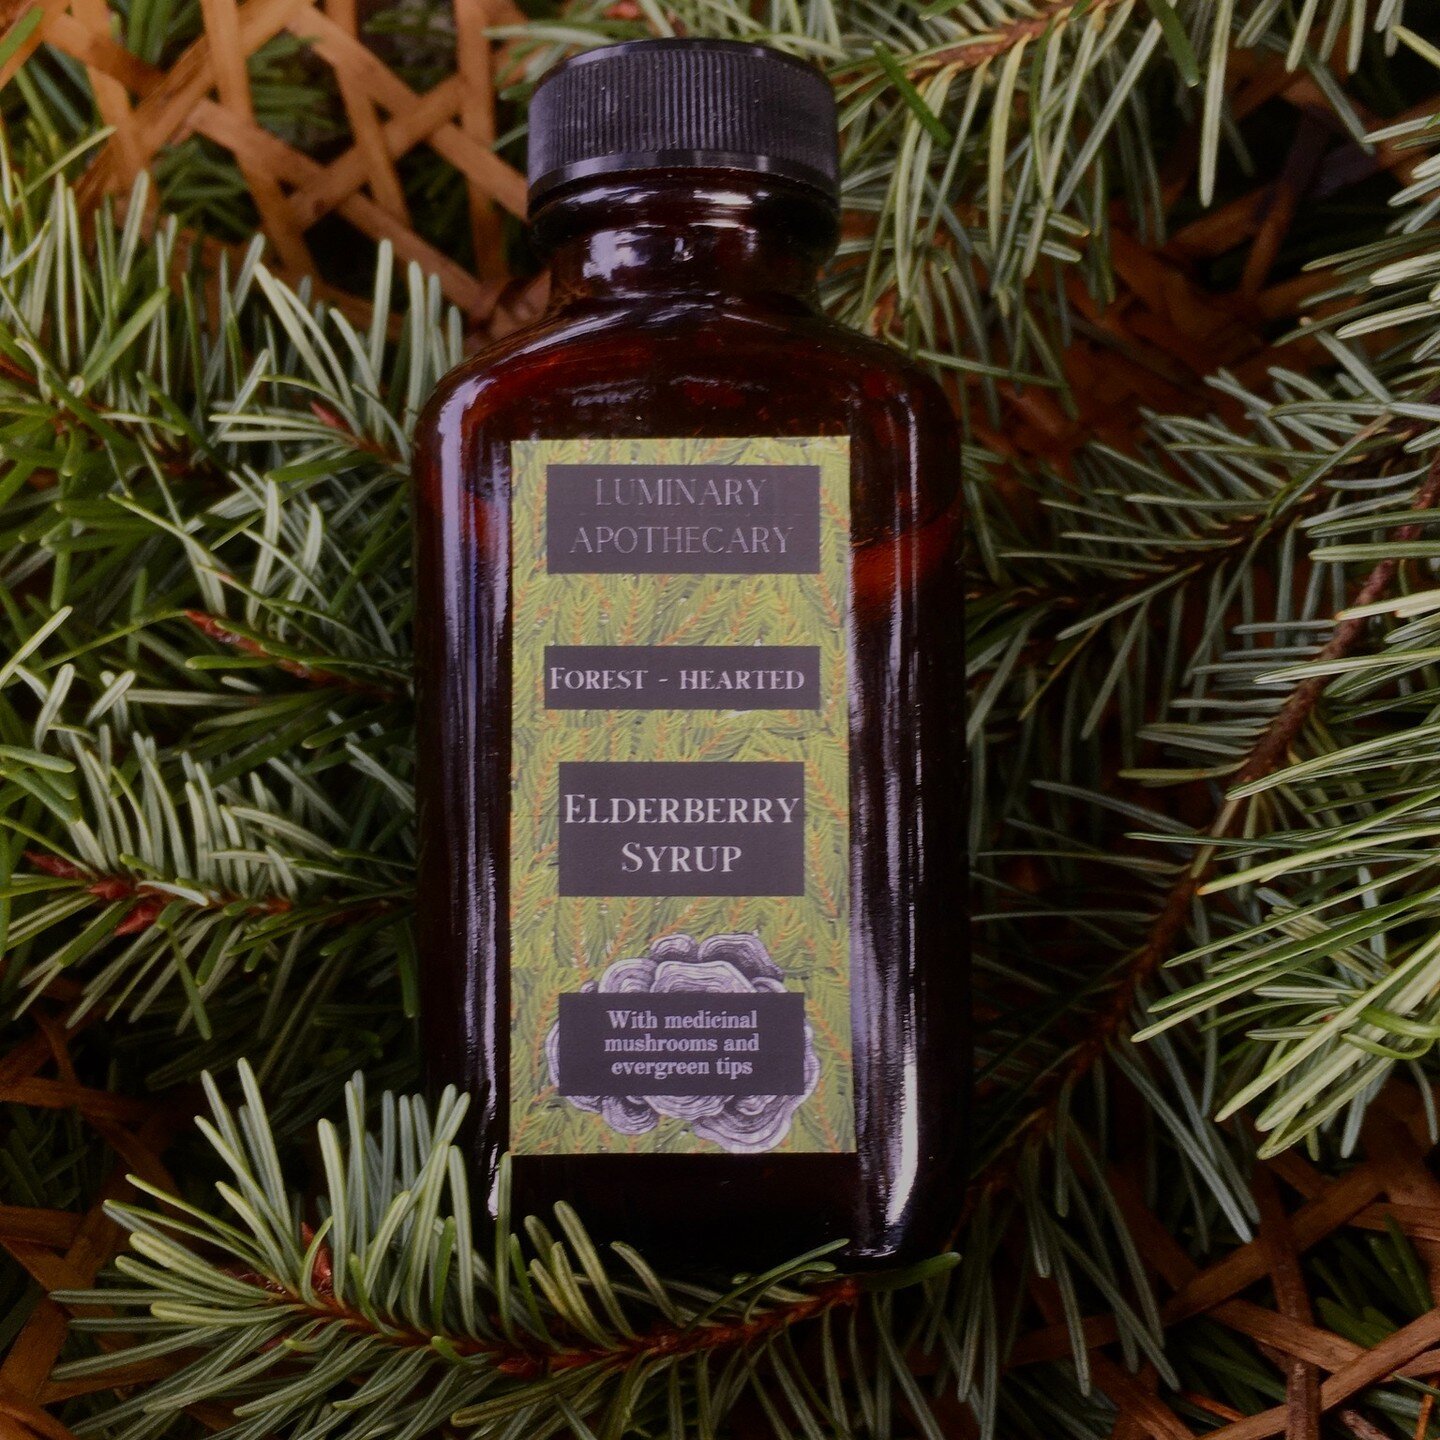 Elderberry syrup with medicinal mushrooms and conifers is now available from the apothecary! I can ship or provide pick up if you're local.

I don't usually make the same thing twice - I make herbal medicine based on the year's harvest, what my patie